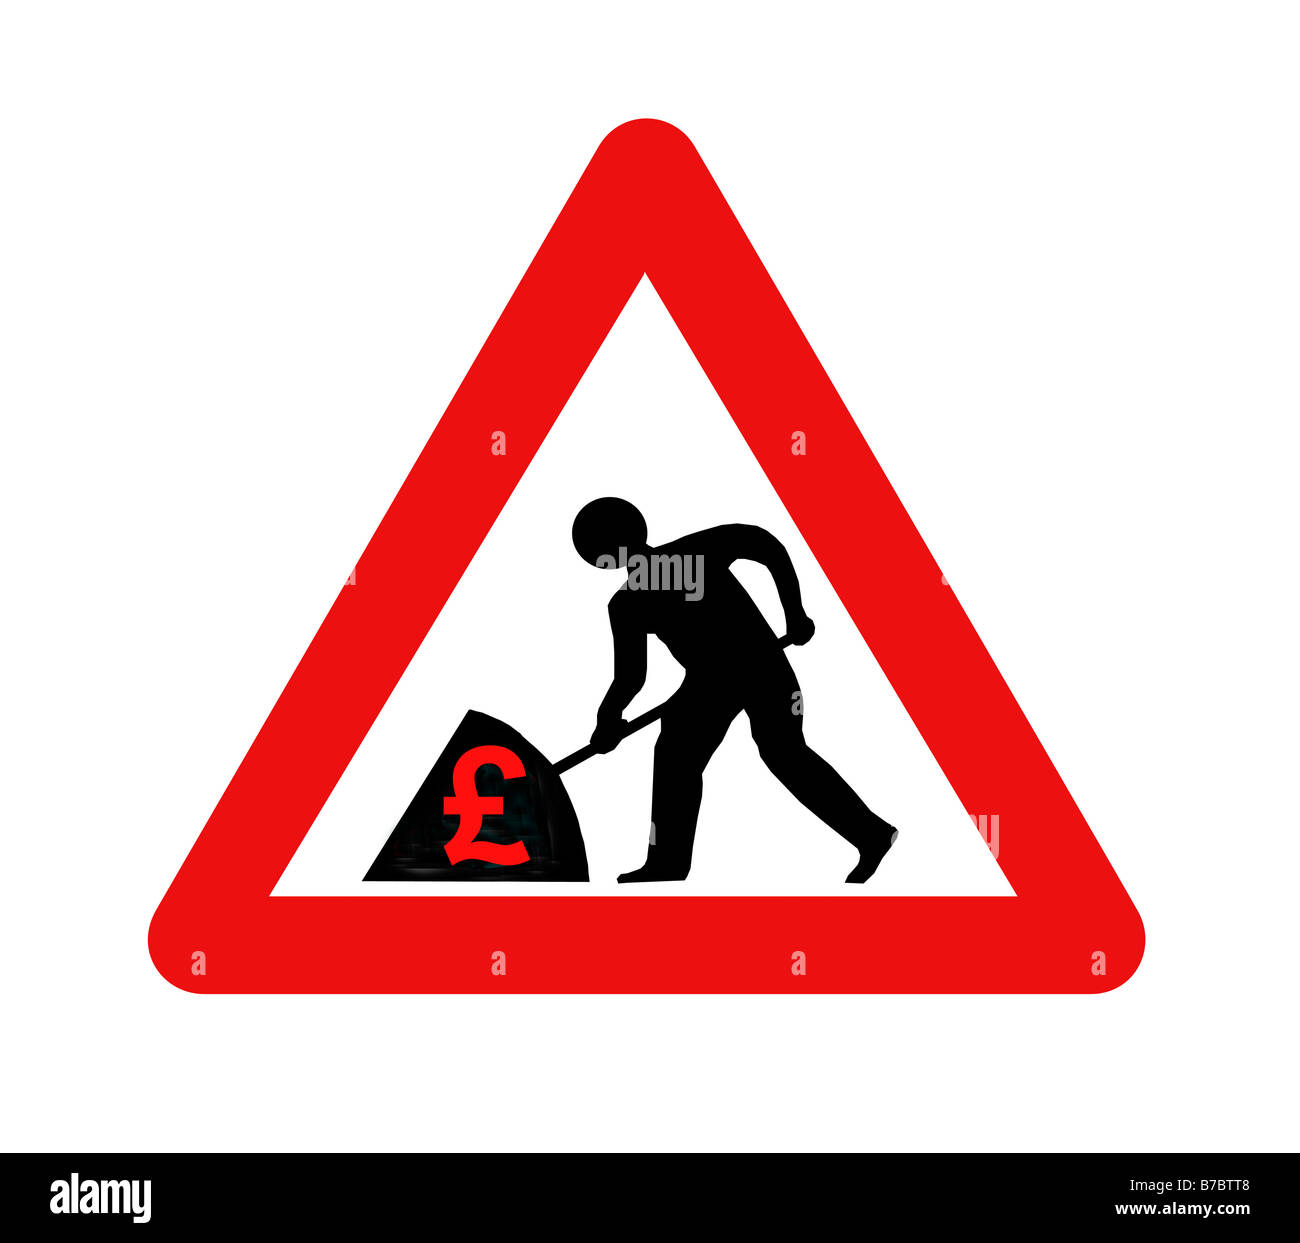 Men at work sign showing pile of money. Could be used to depict bank bailout, inflation, government spending.... Stock Photo